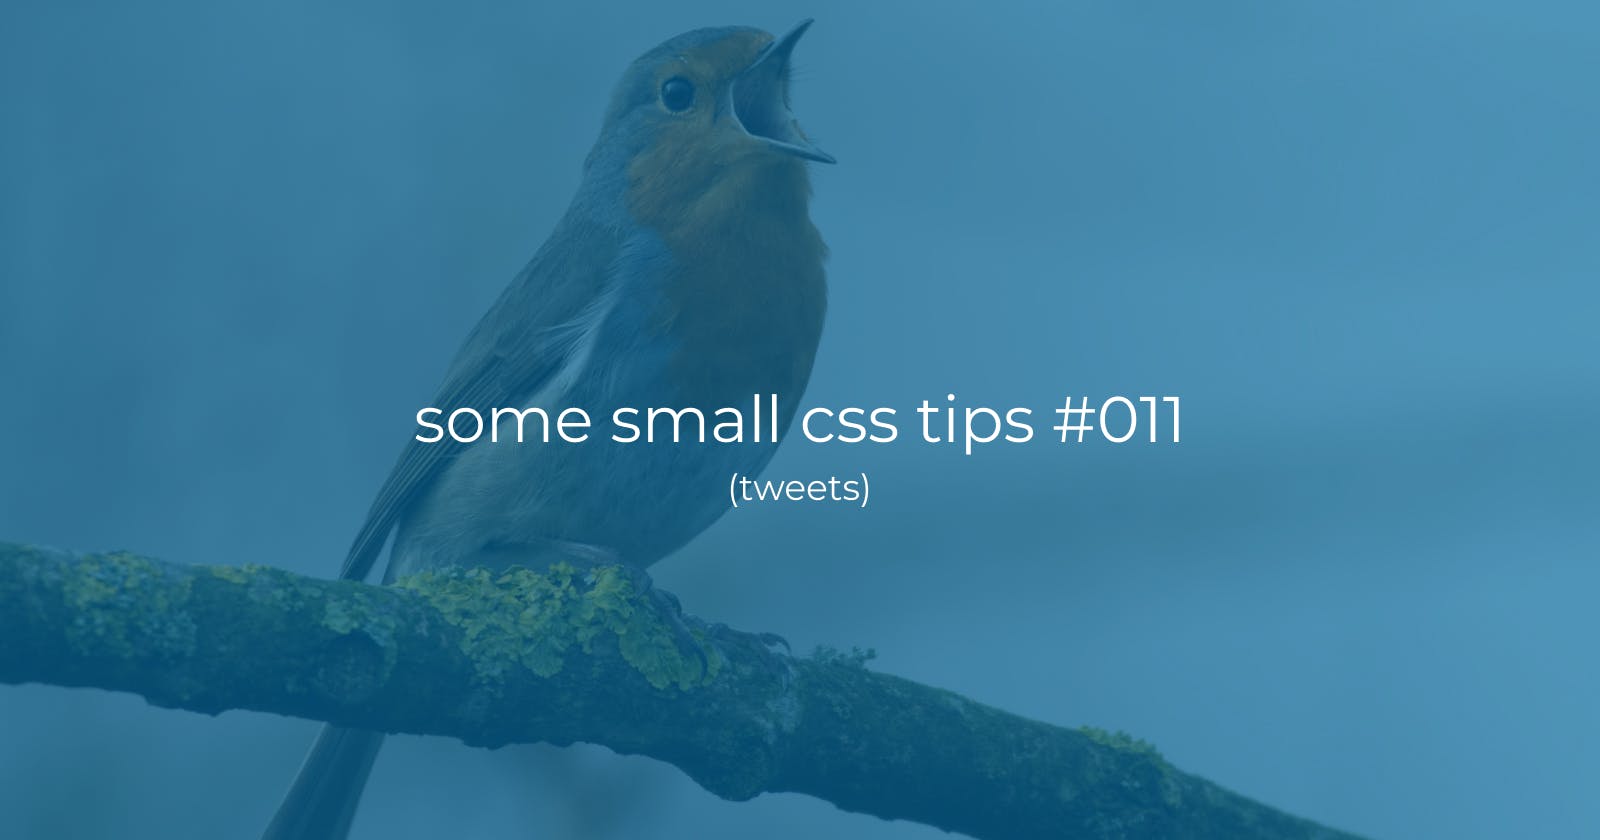 Some small Css tips #011